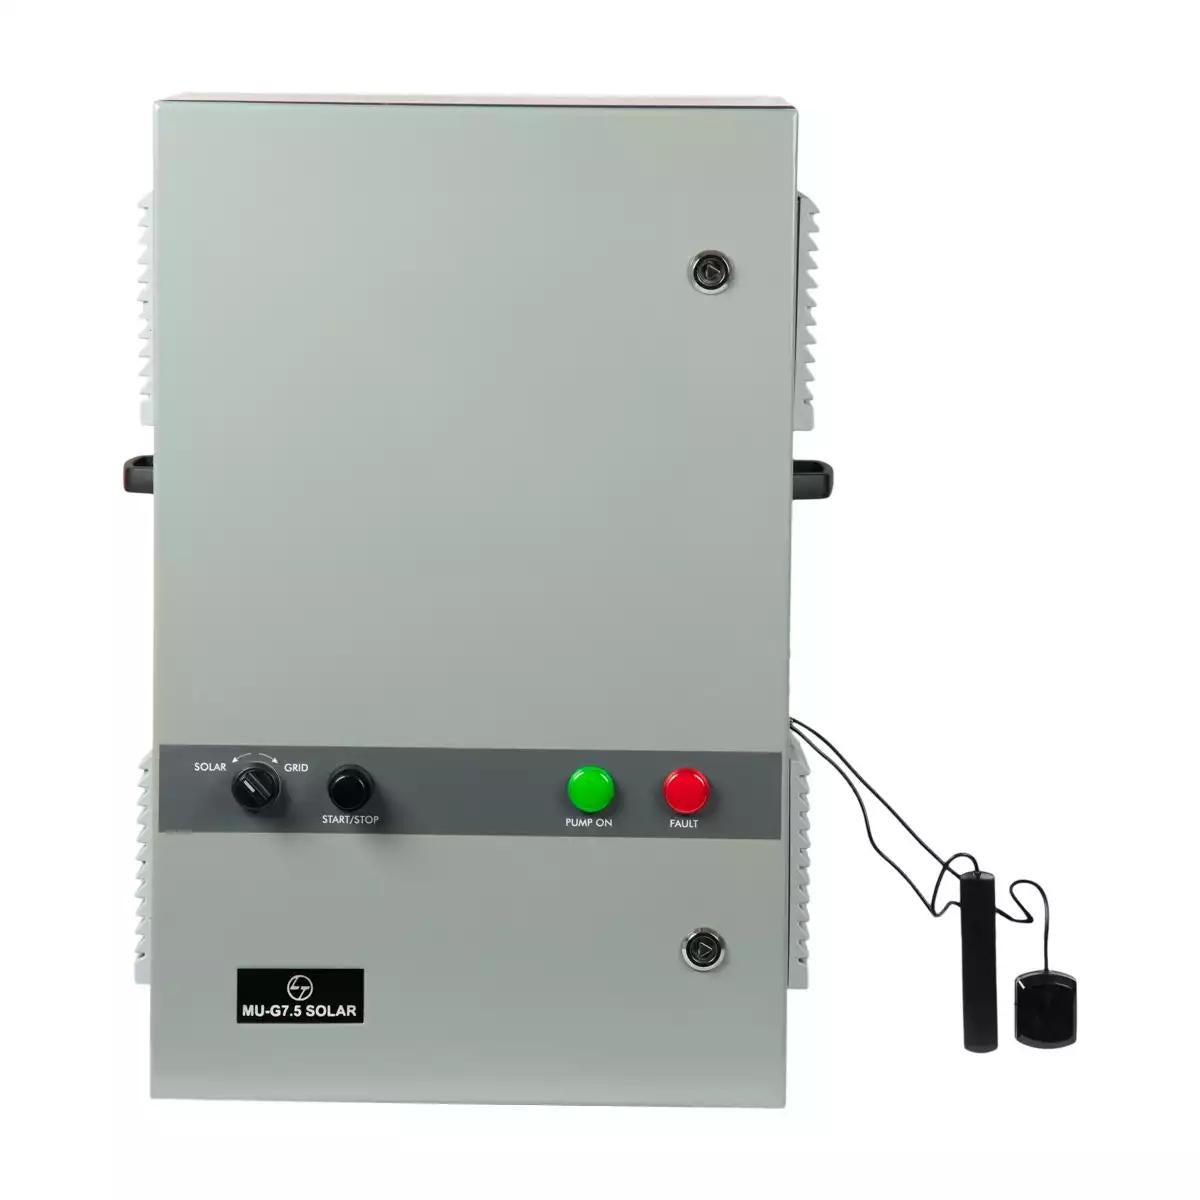 Solar Controller for 415V Induction motor pumps,7.5HP,With RMU